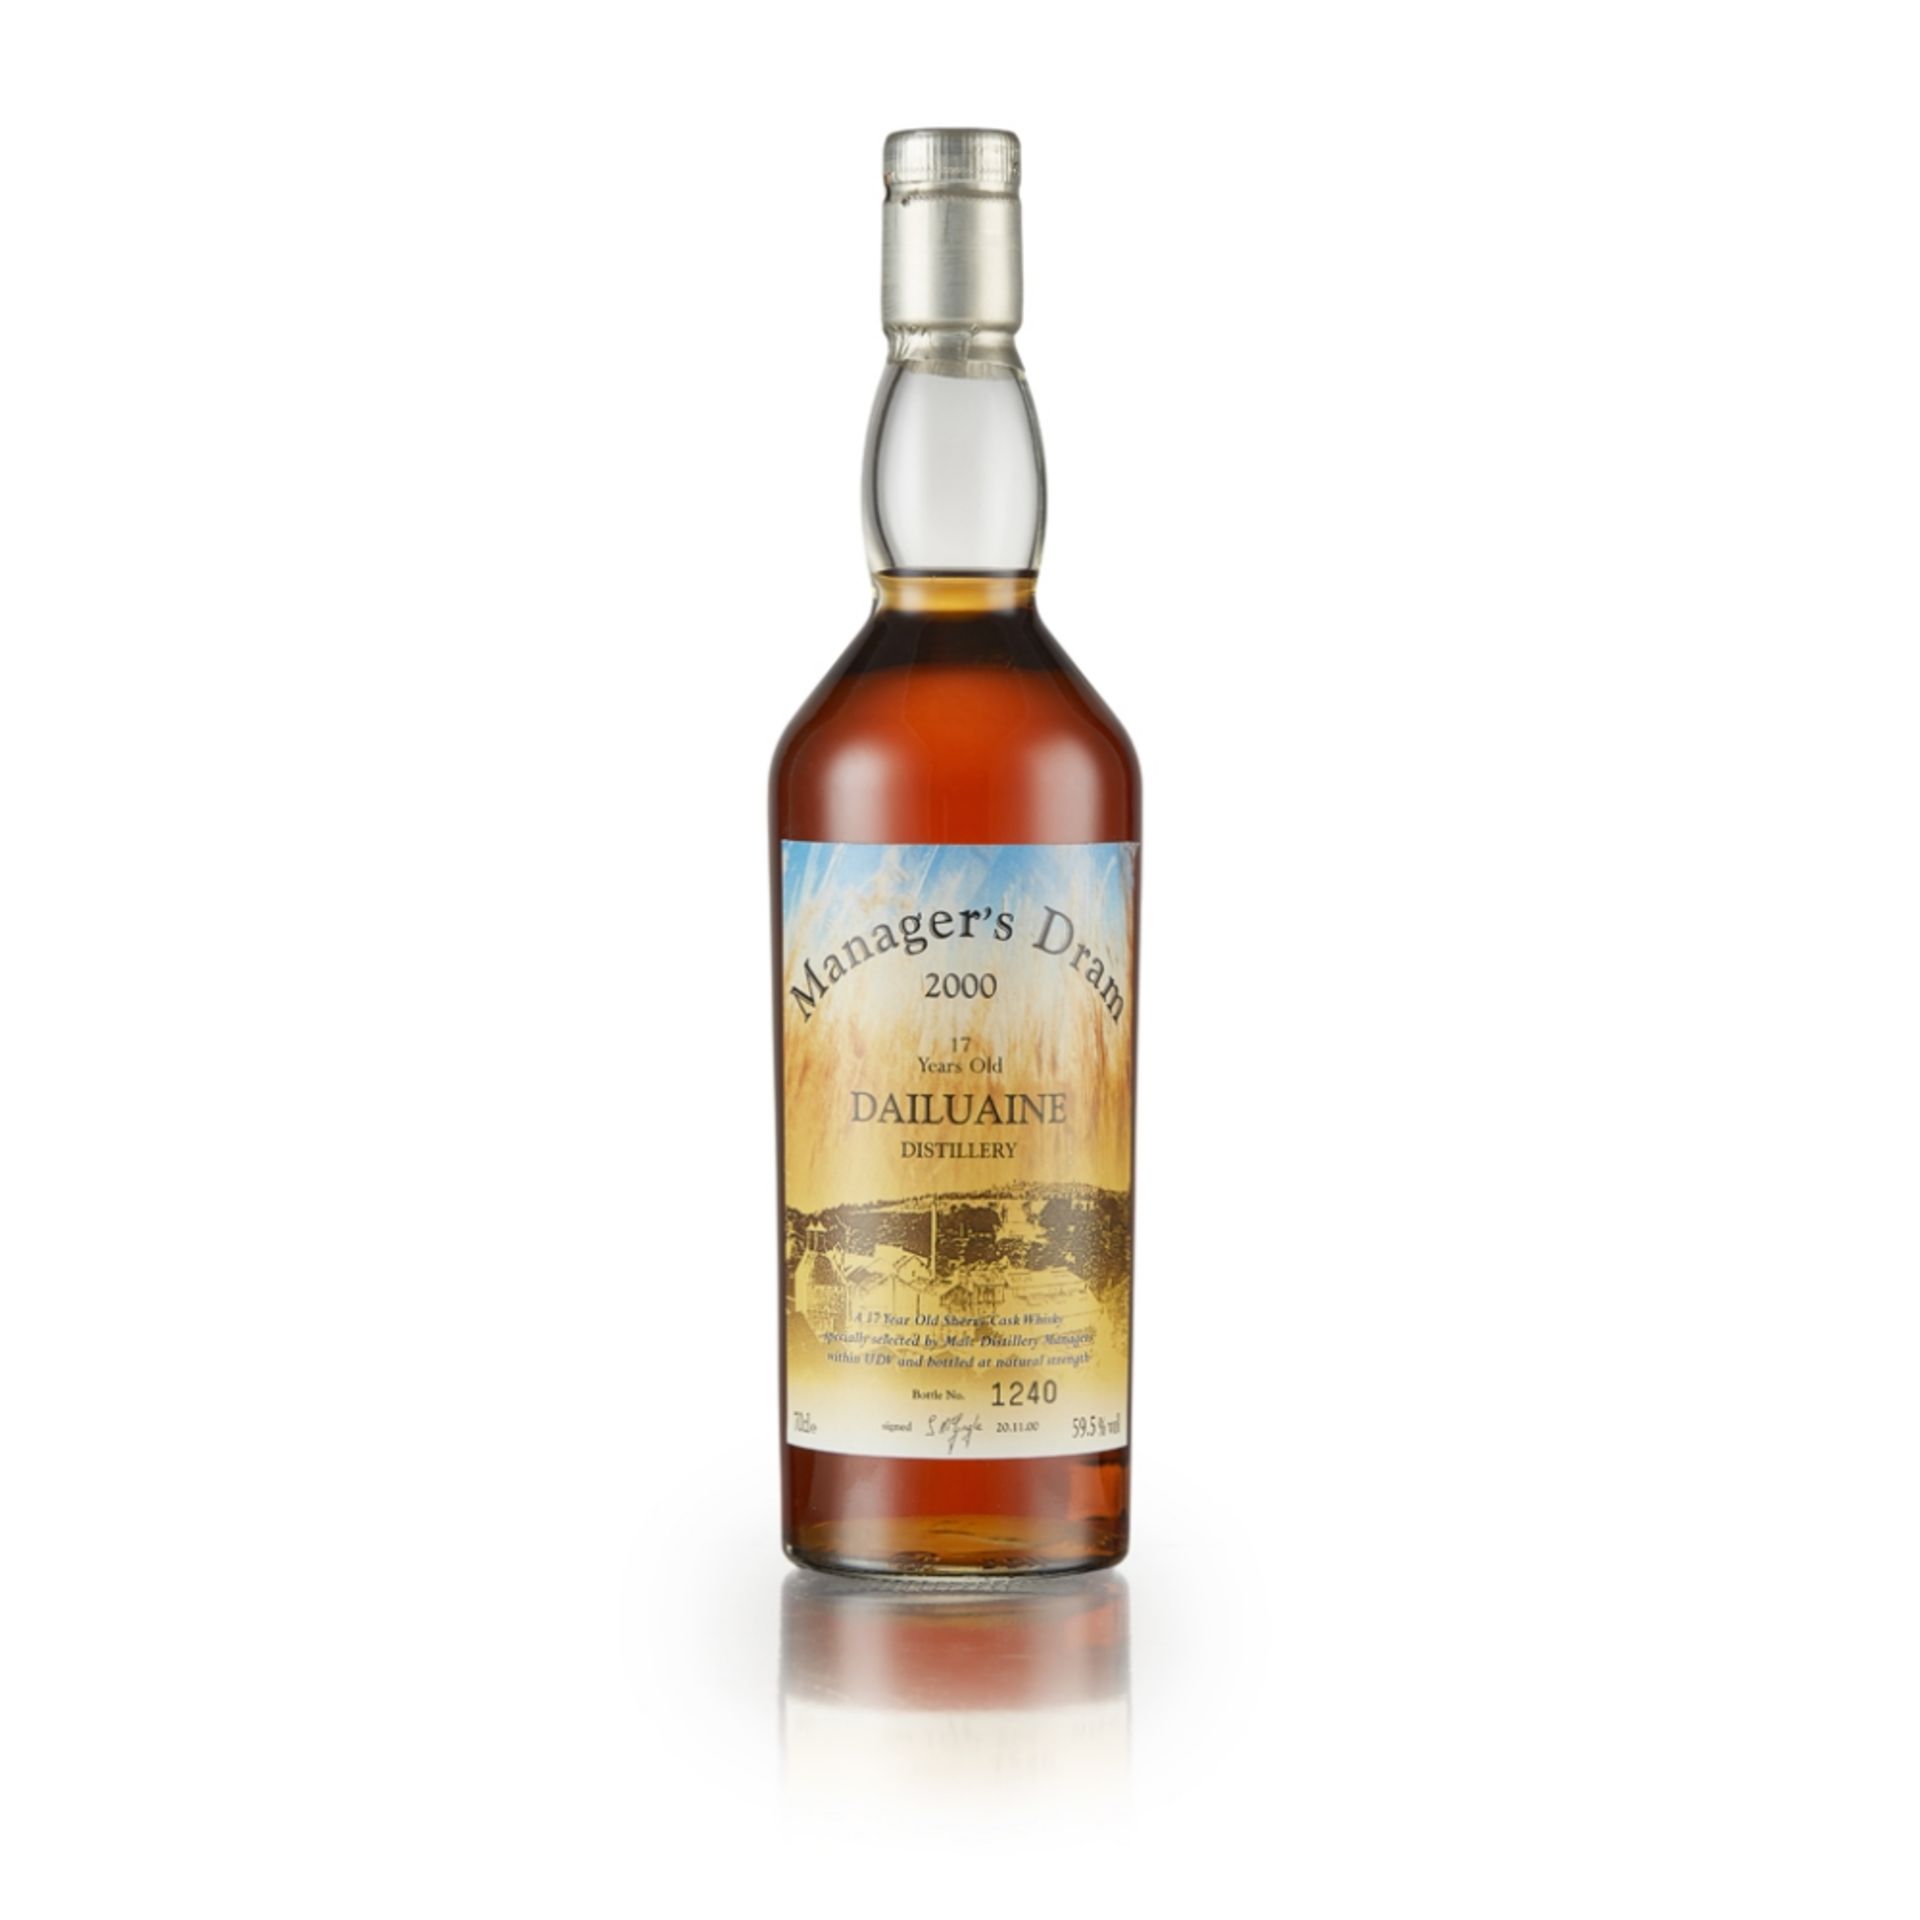 DAILUAINE 17 YEAR OLD - THE MANAGER'S DRAM DISTILLERY ACTIVE matured in sherry casks, bottle